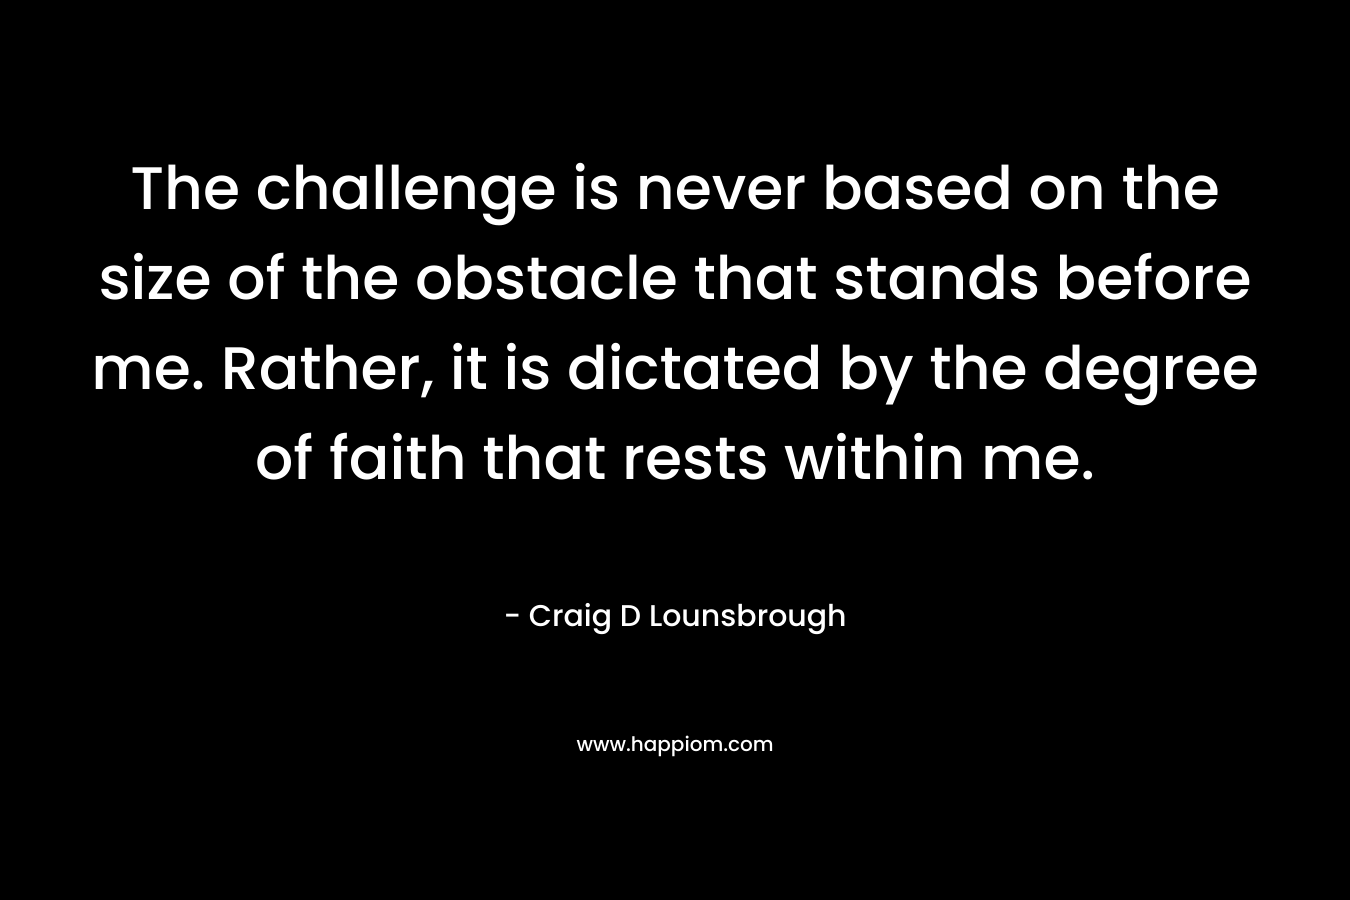 The challenge is never based on the size of the obstacle that stands before me. Rather, it is dictated by the degree of faith that rests within me. – Craig D Lounsbrough